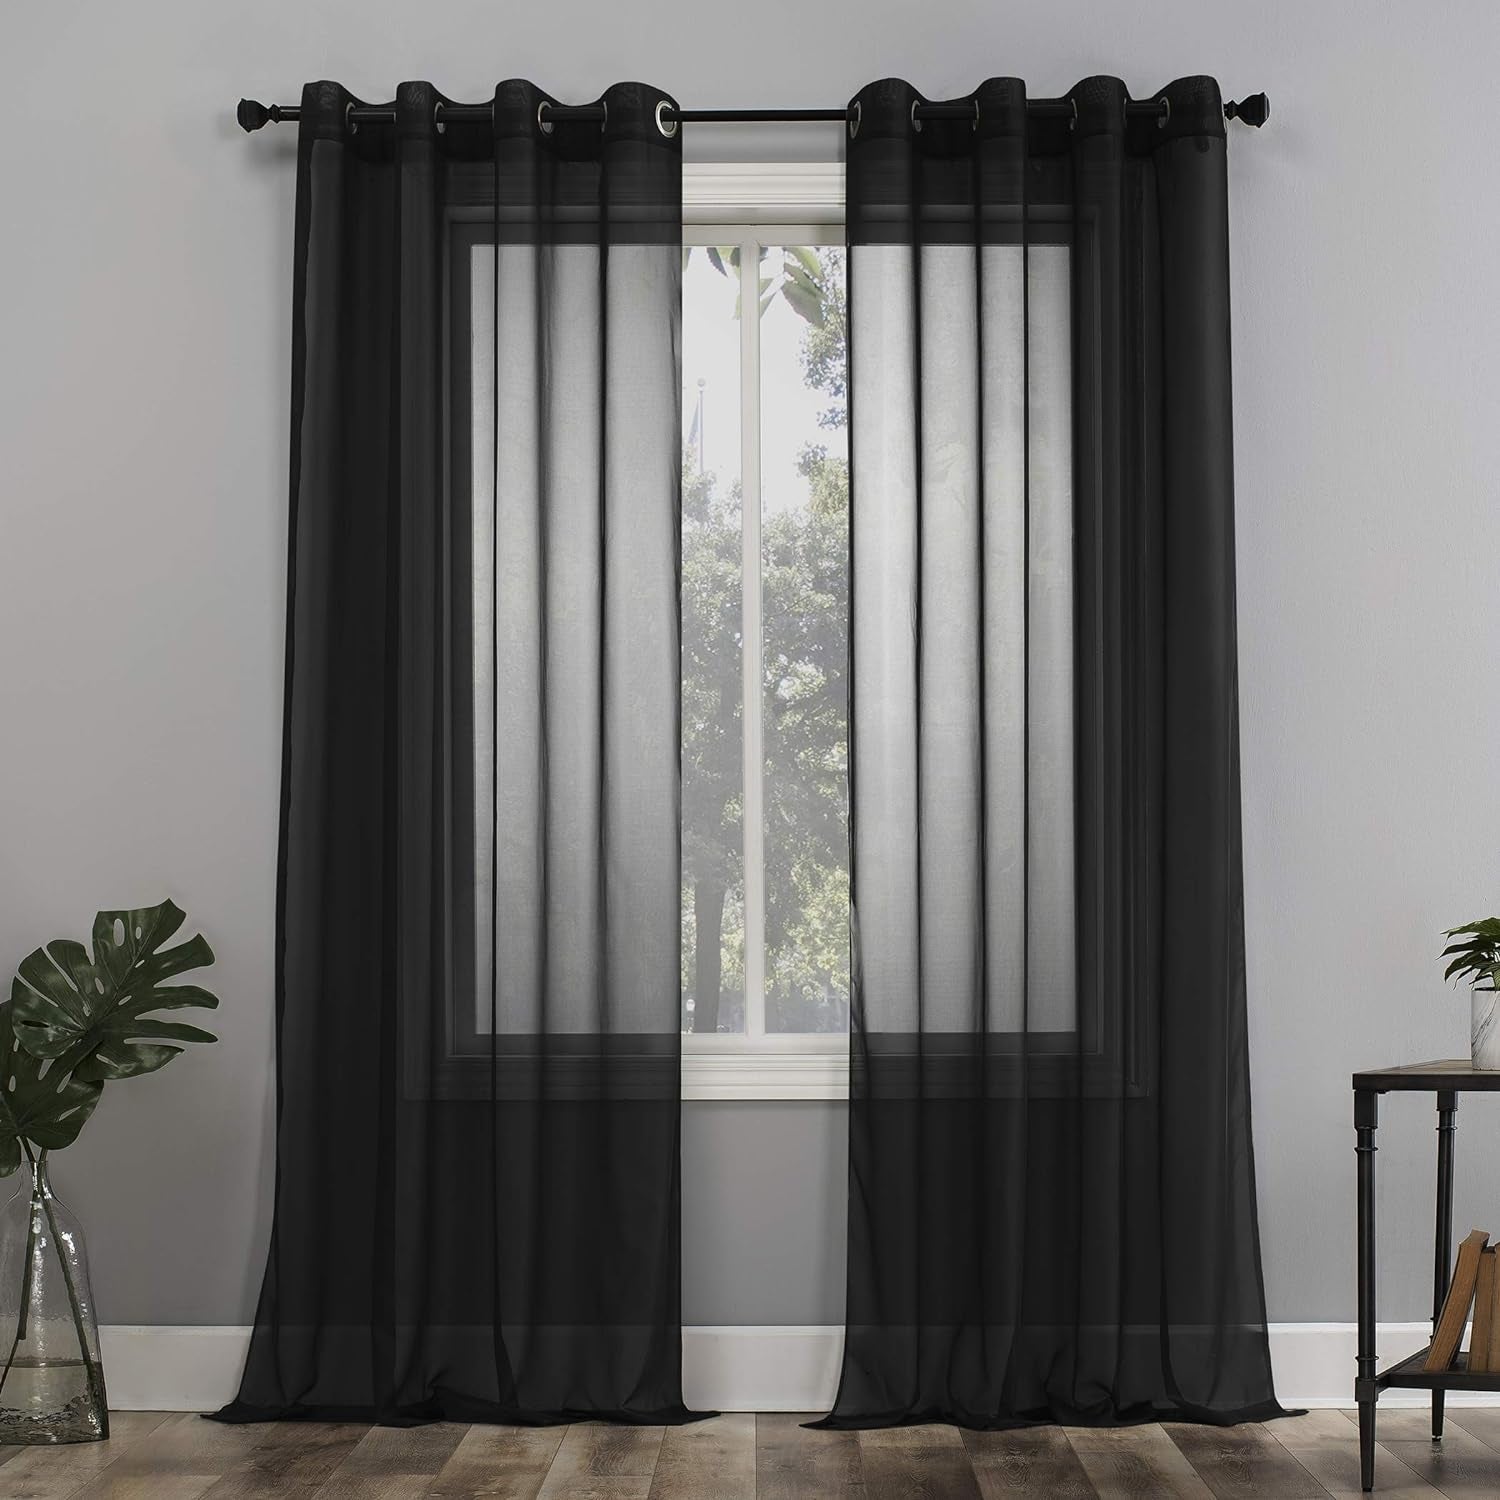 No. 918 Emily Sheer Voile Grommet Curtain Panel, 59" X 95", White  No. 918 Black Curtain Panel 59" X 95"